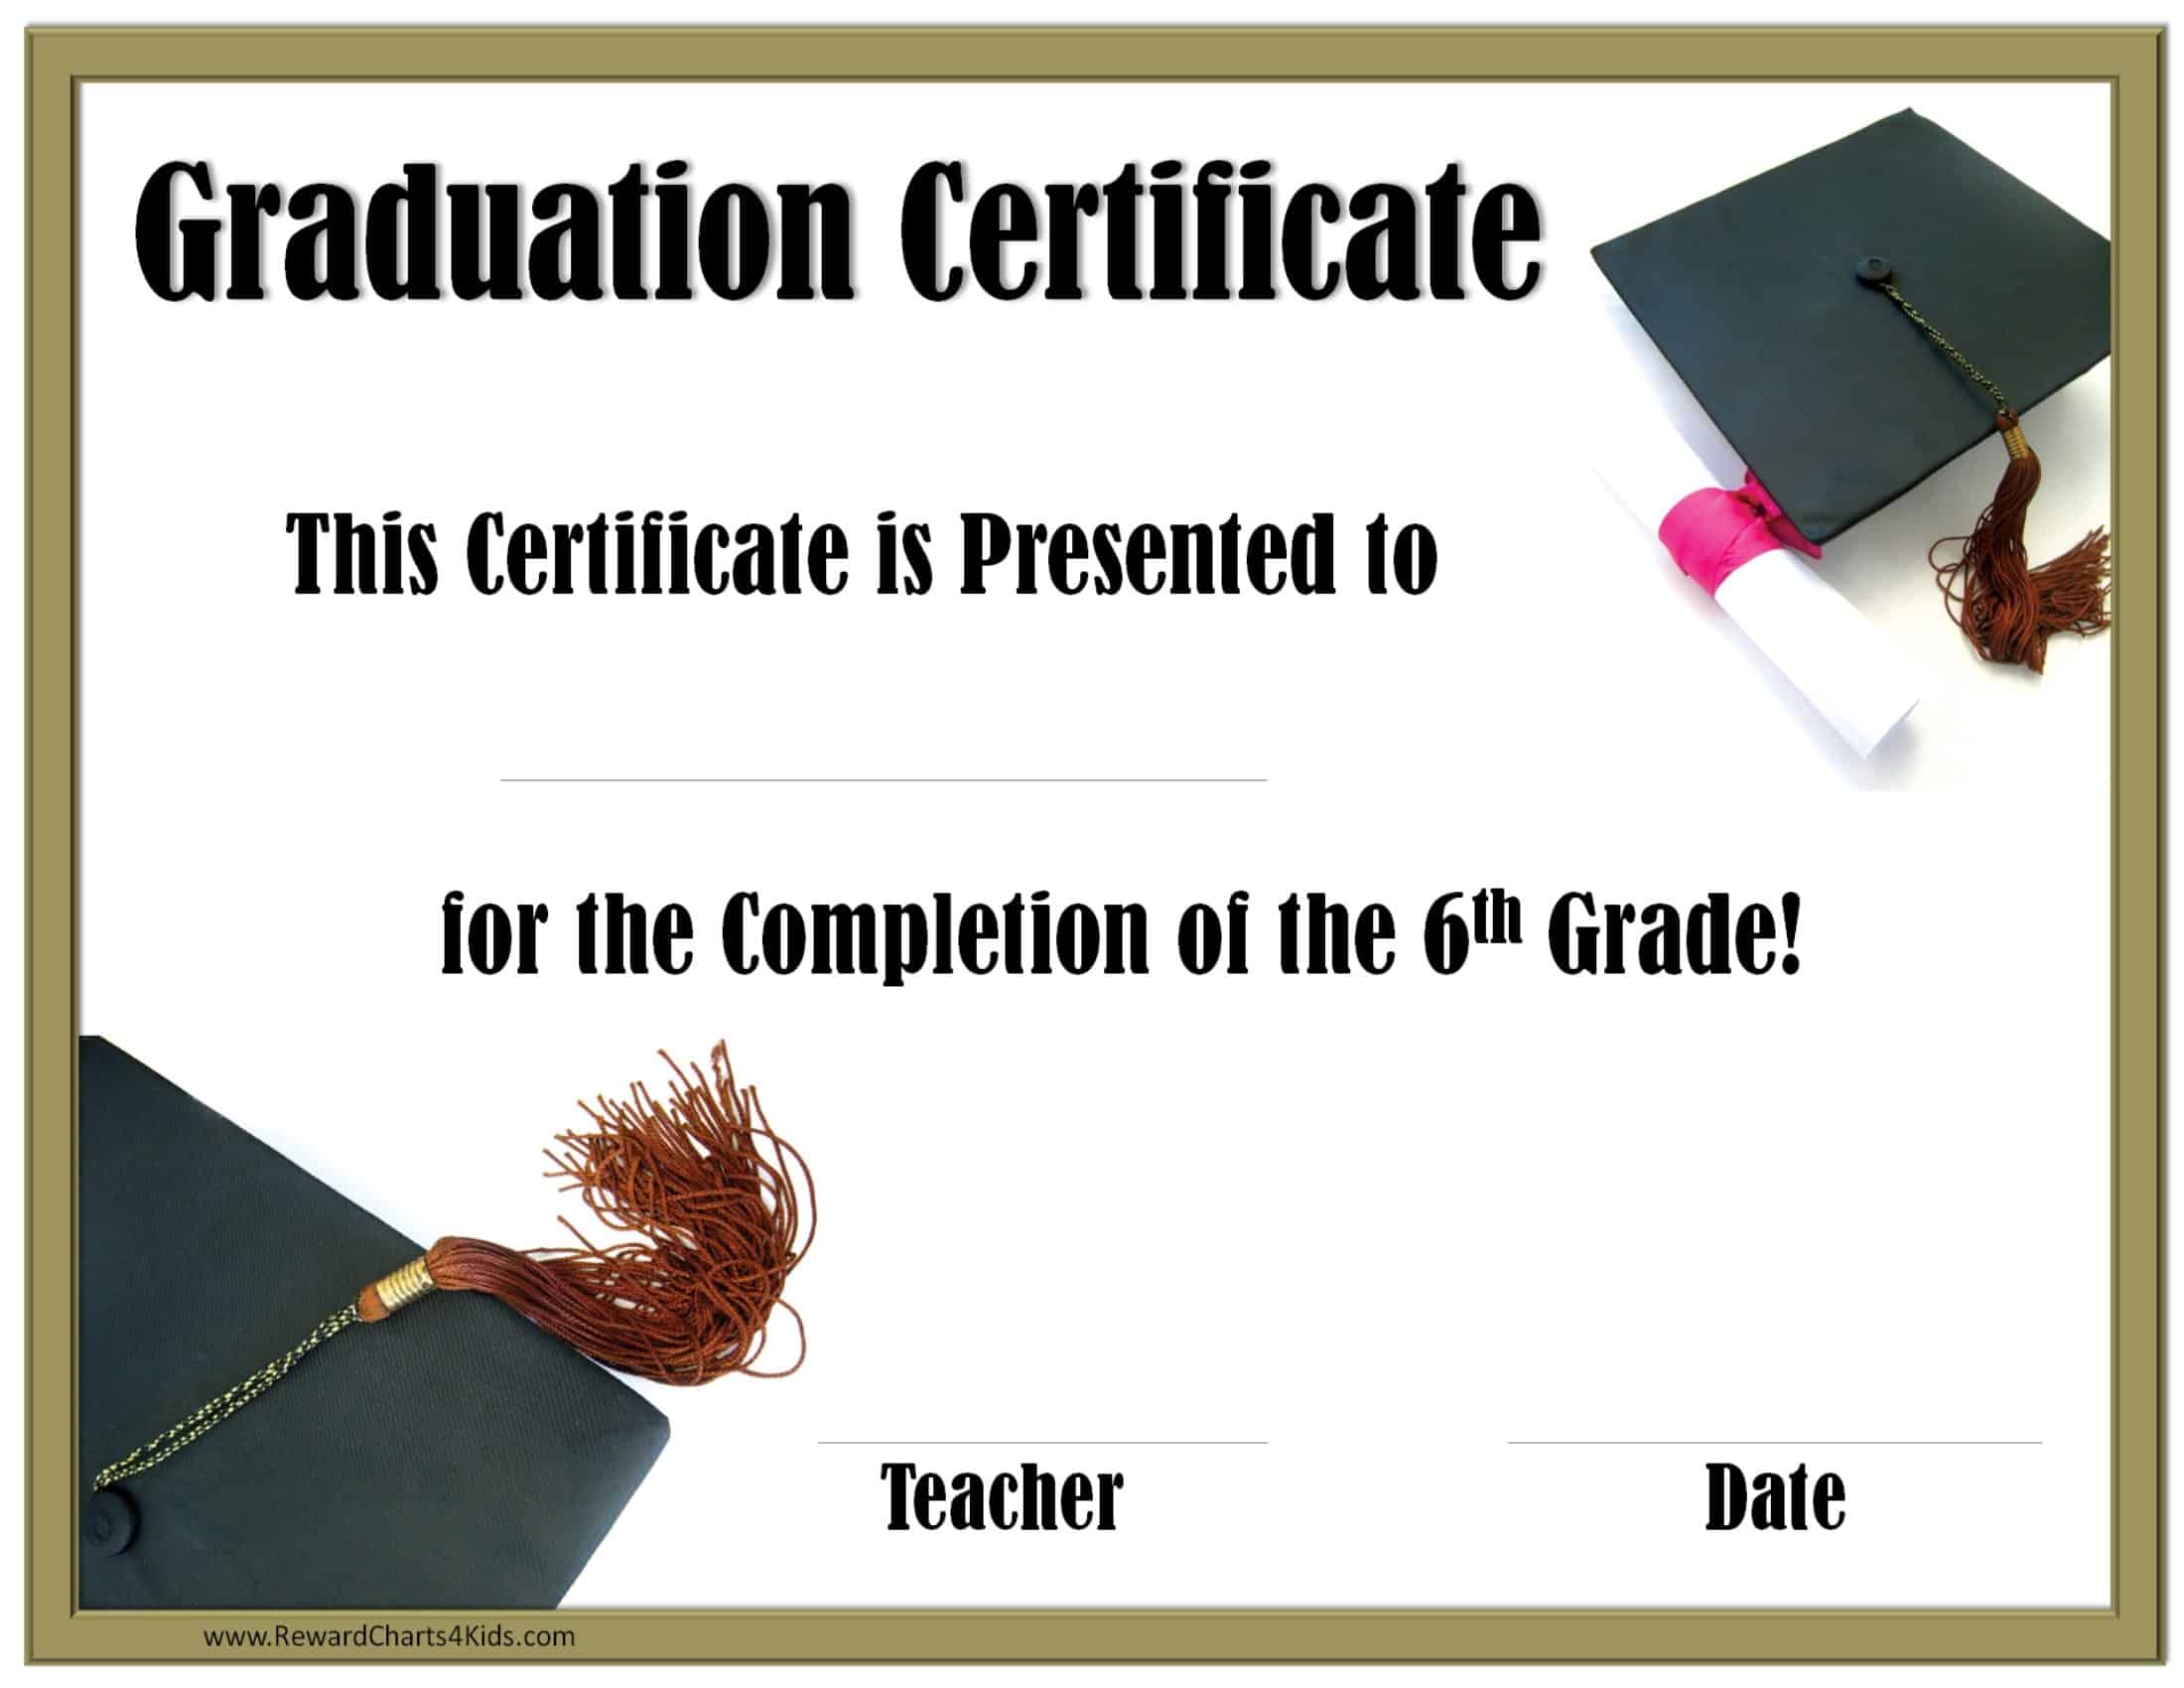 school-graduation-certificates-customize-online-with-or-without-a-photo